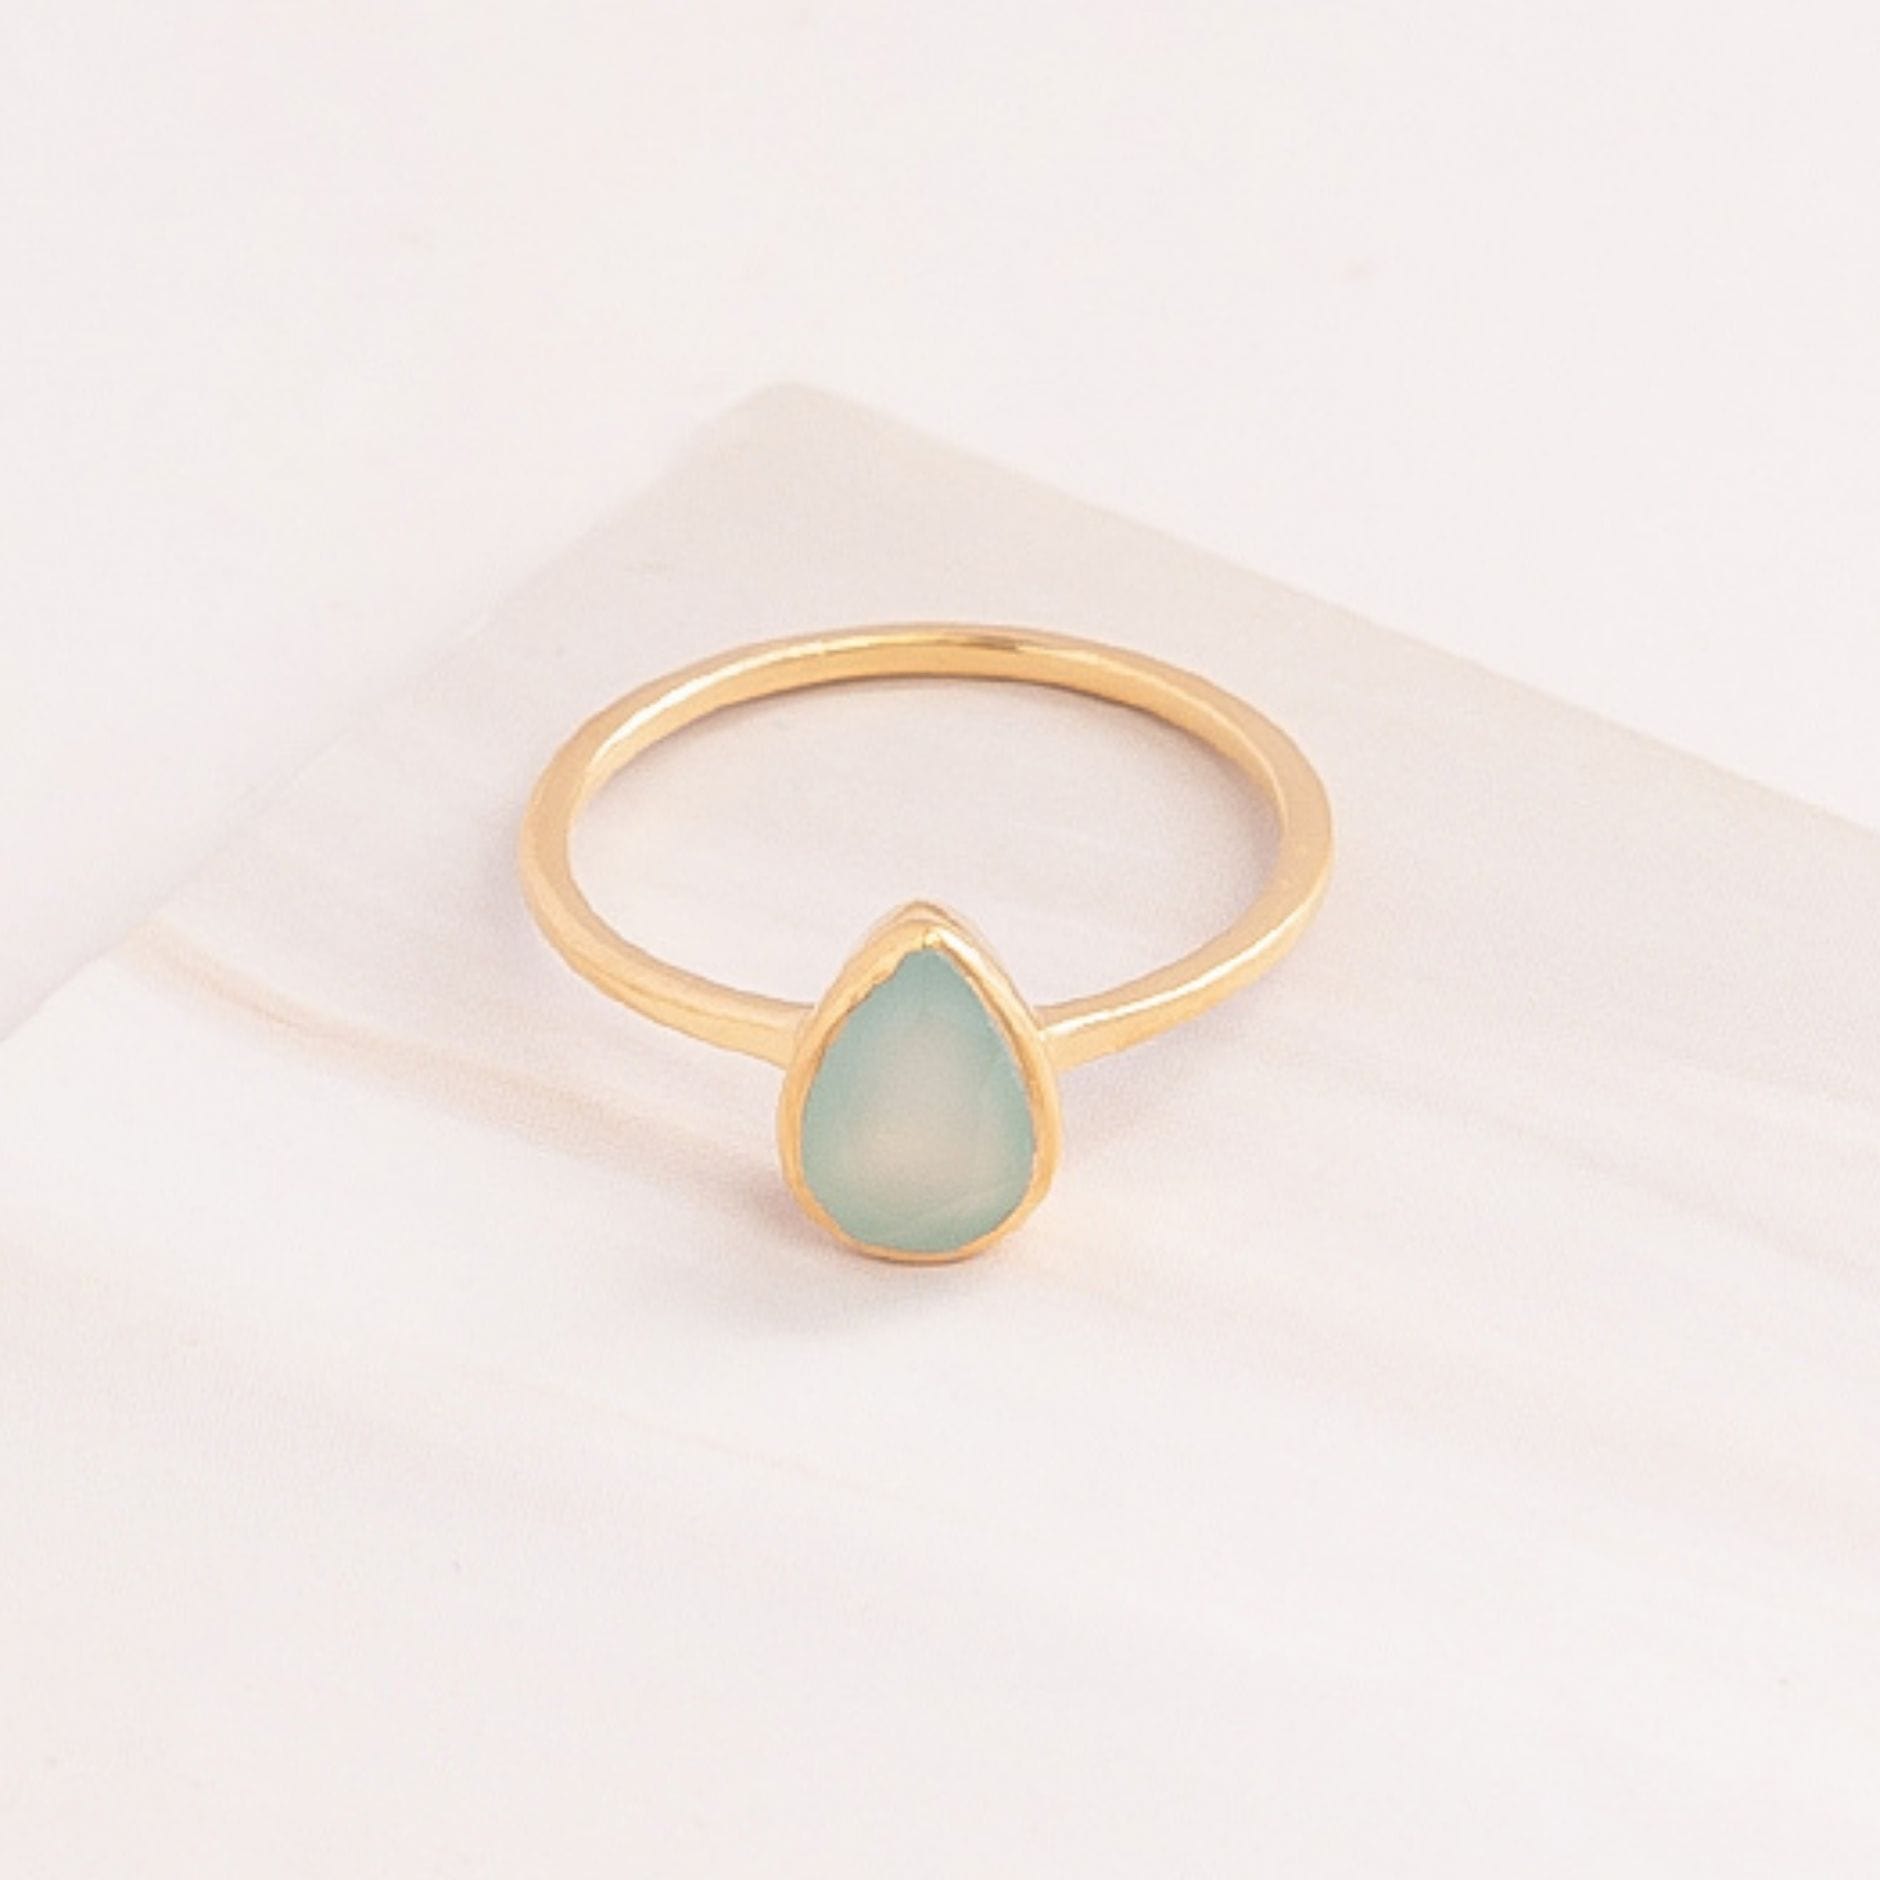 Emblem Jewelry Rings Chalcedony / Pear Signature Candy Gemstone Stack Rings (Ring Size 4)